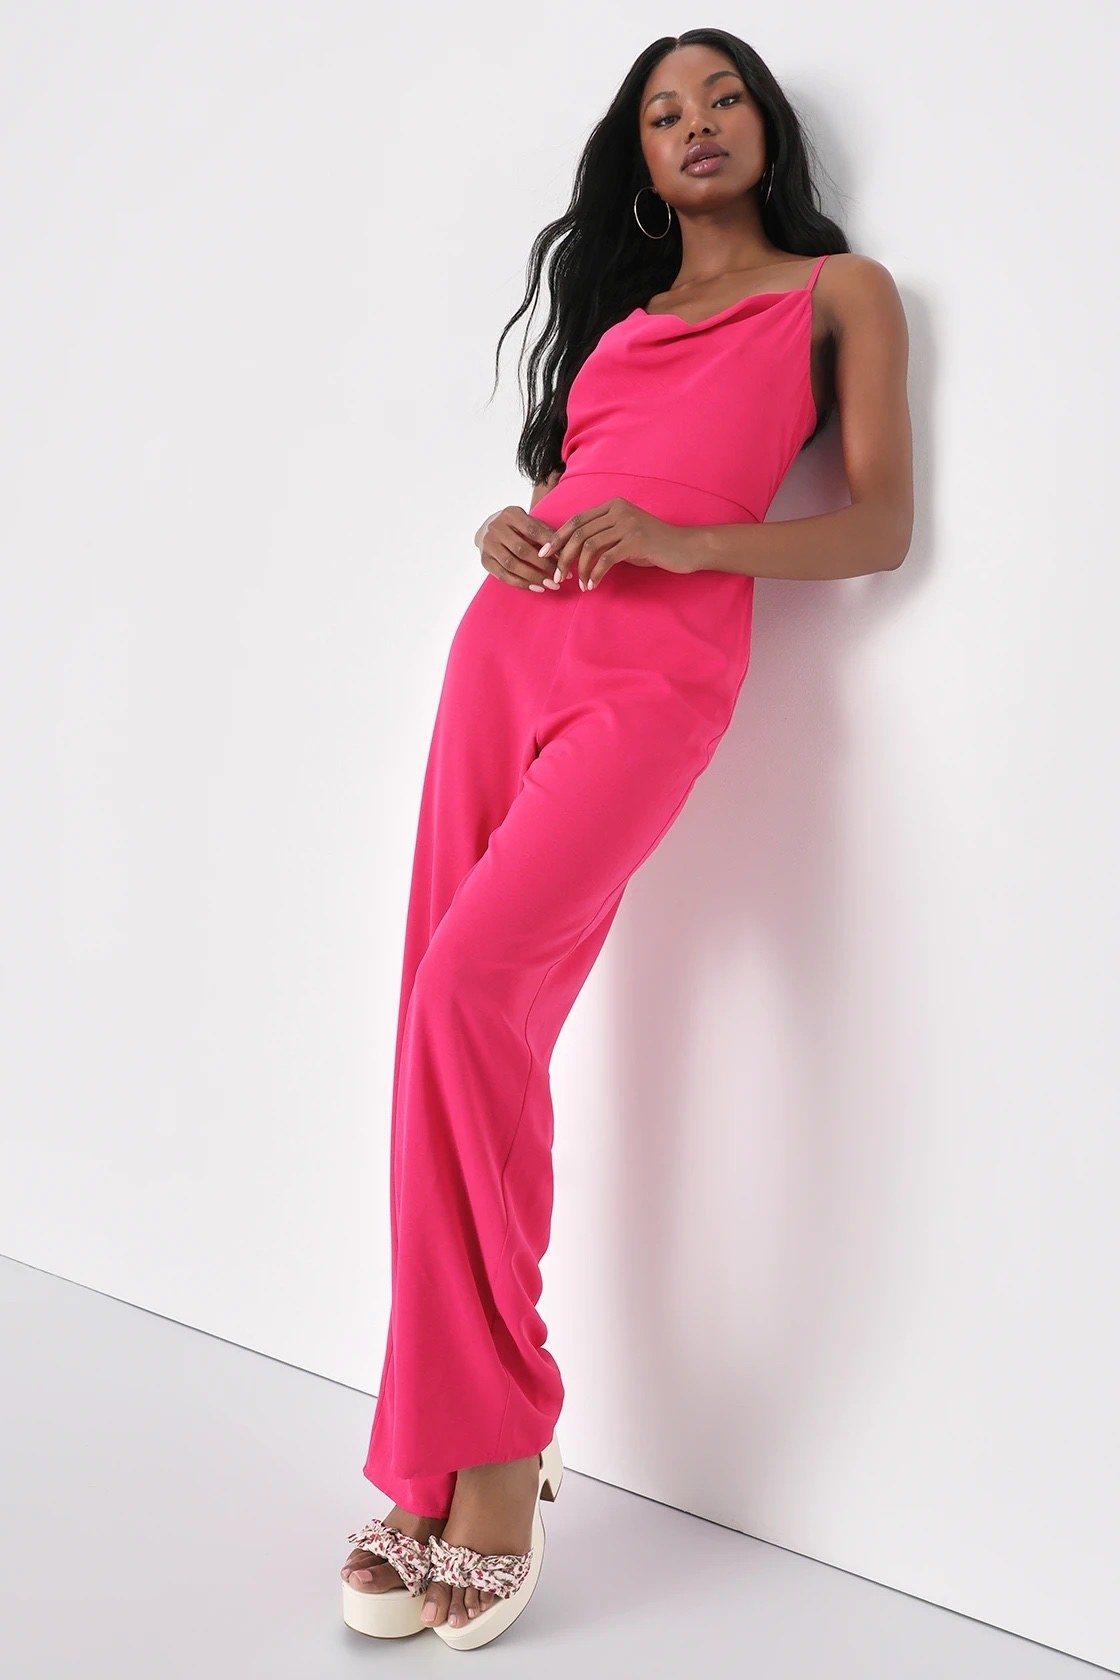 A model in a pink jumpsuit with white shoes